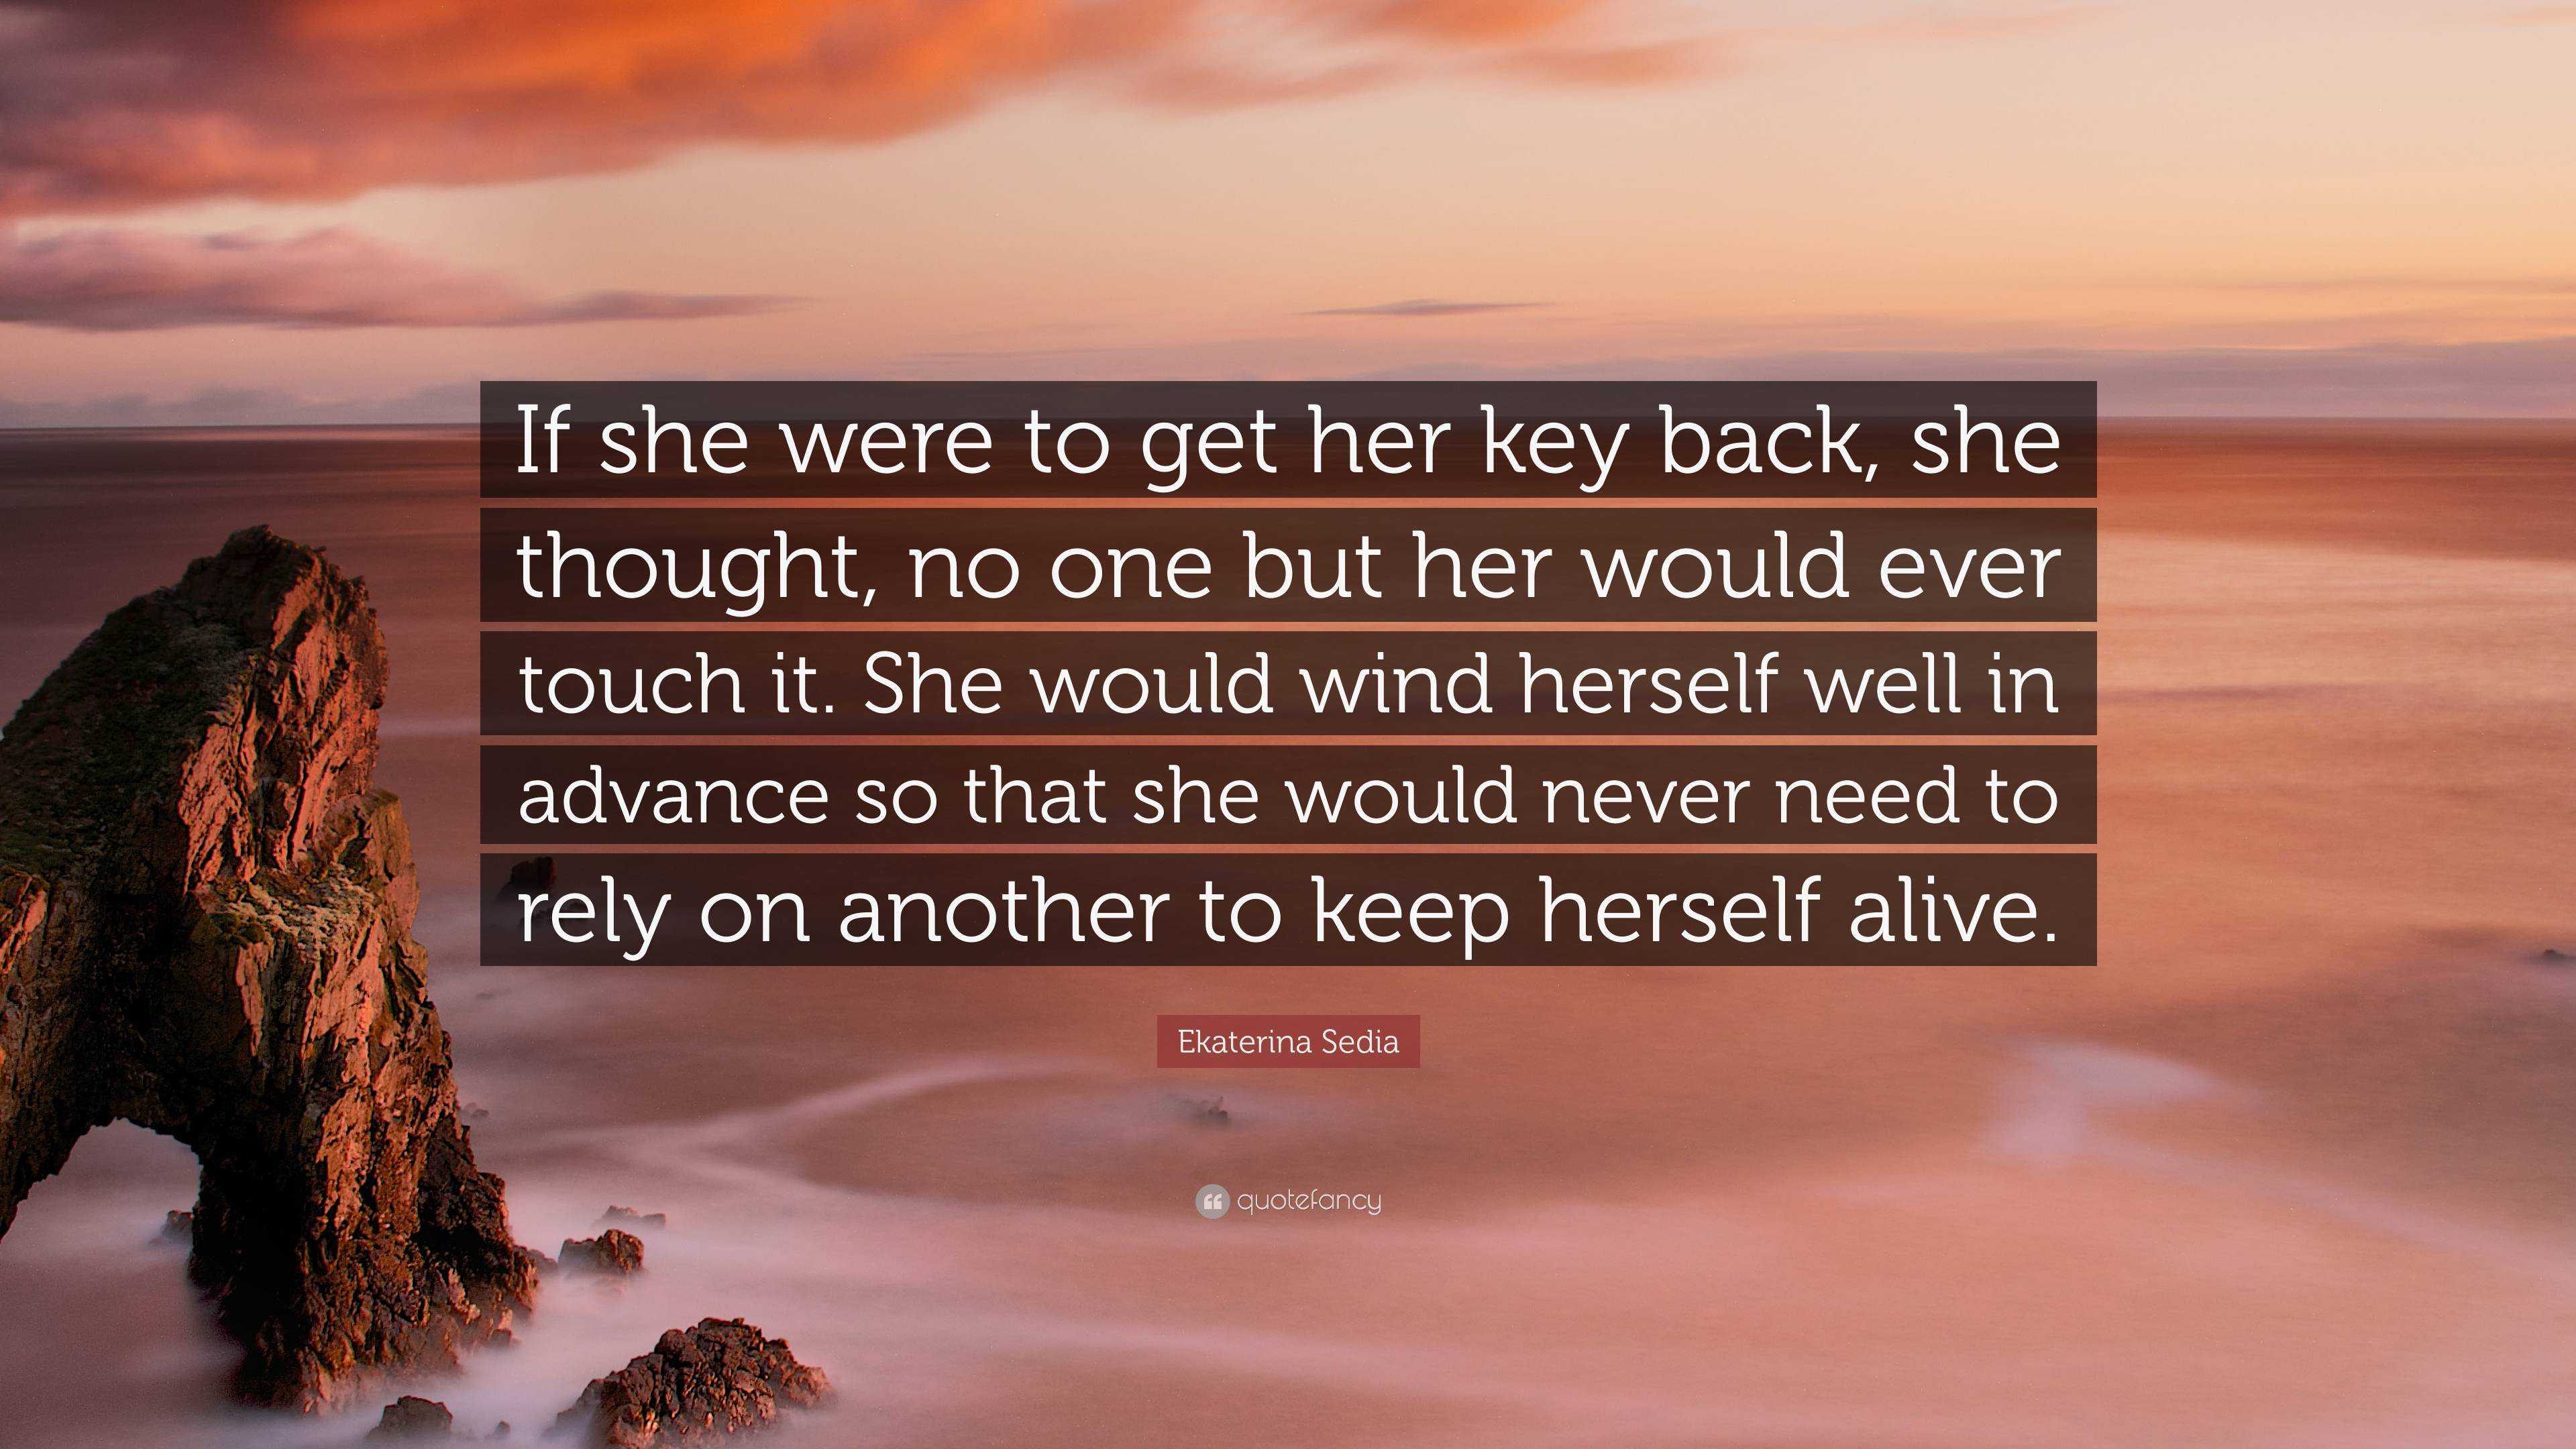 Ekaterina Sedia Quote: “If she were to get her key back, she thought ...